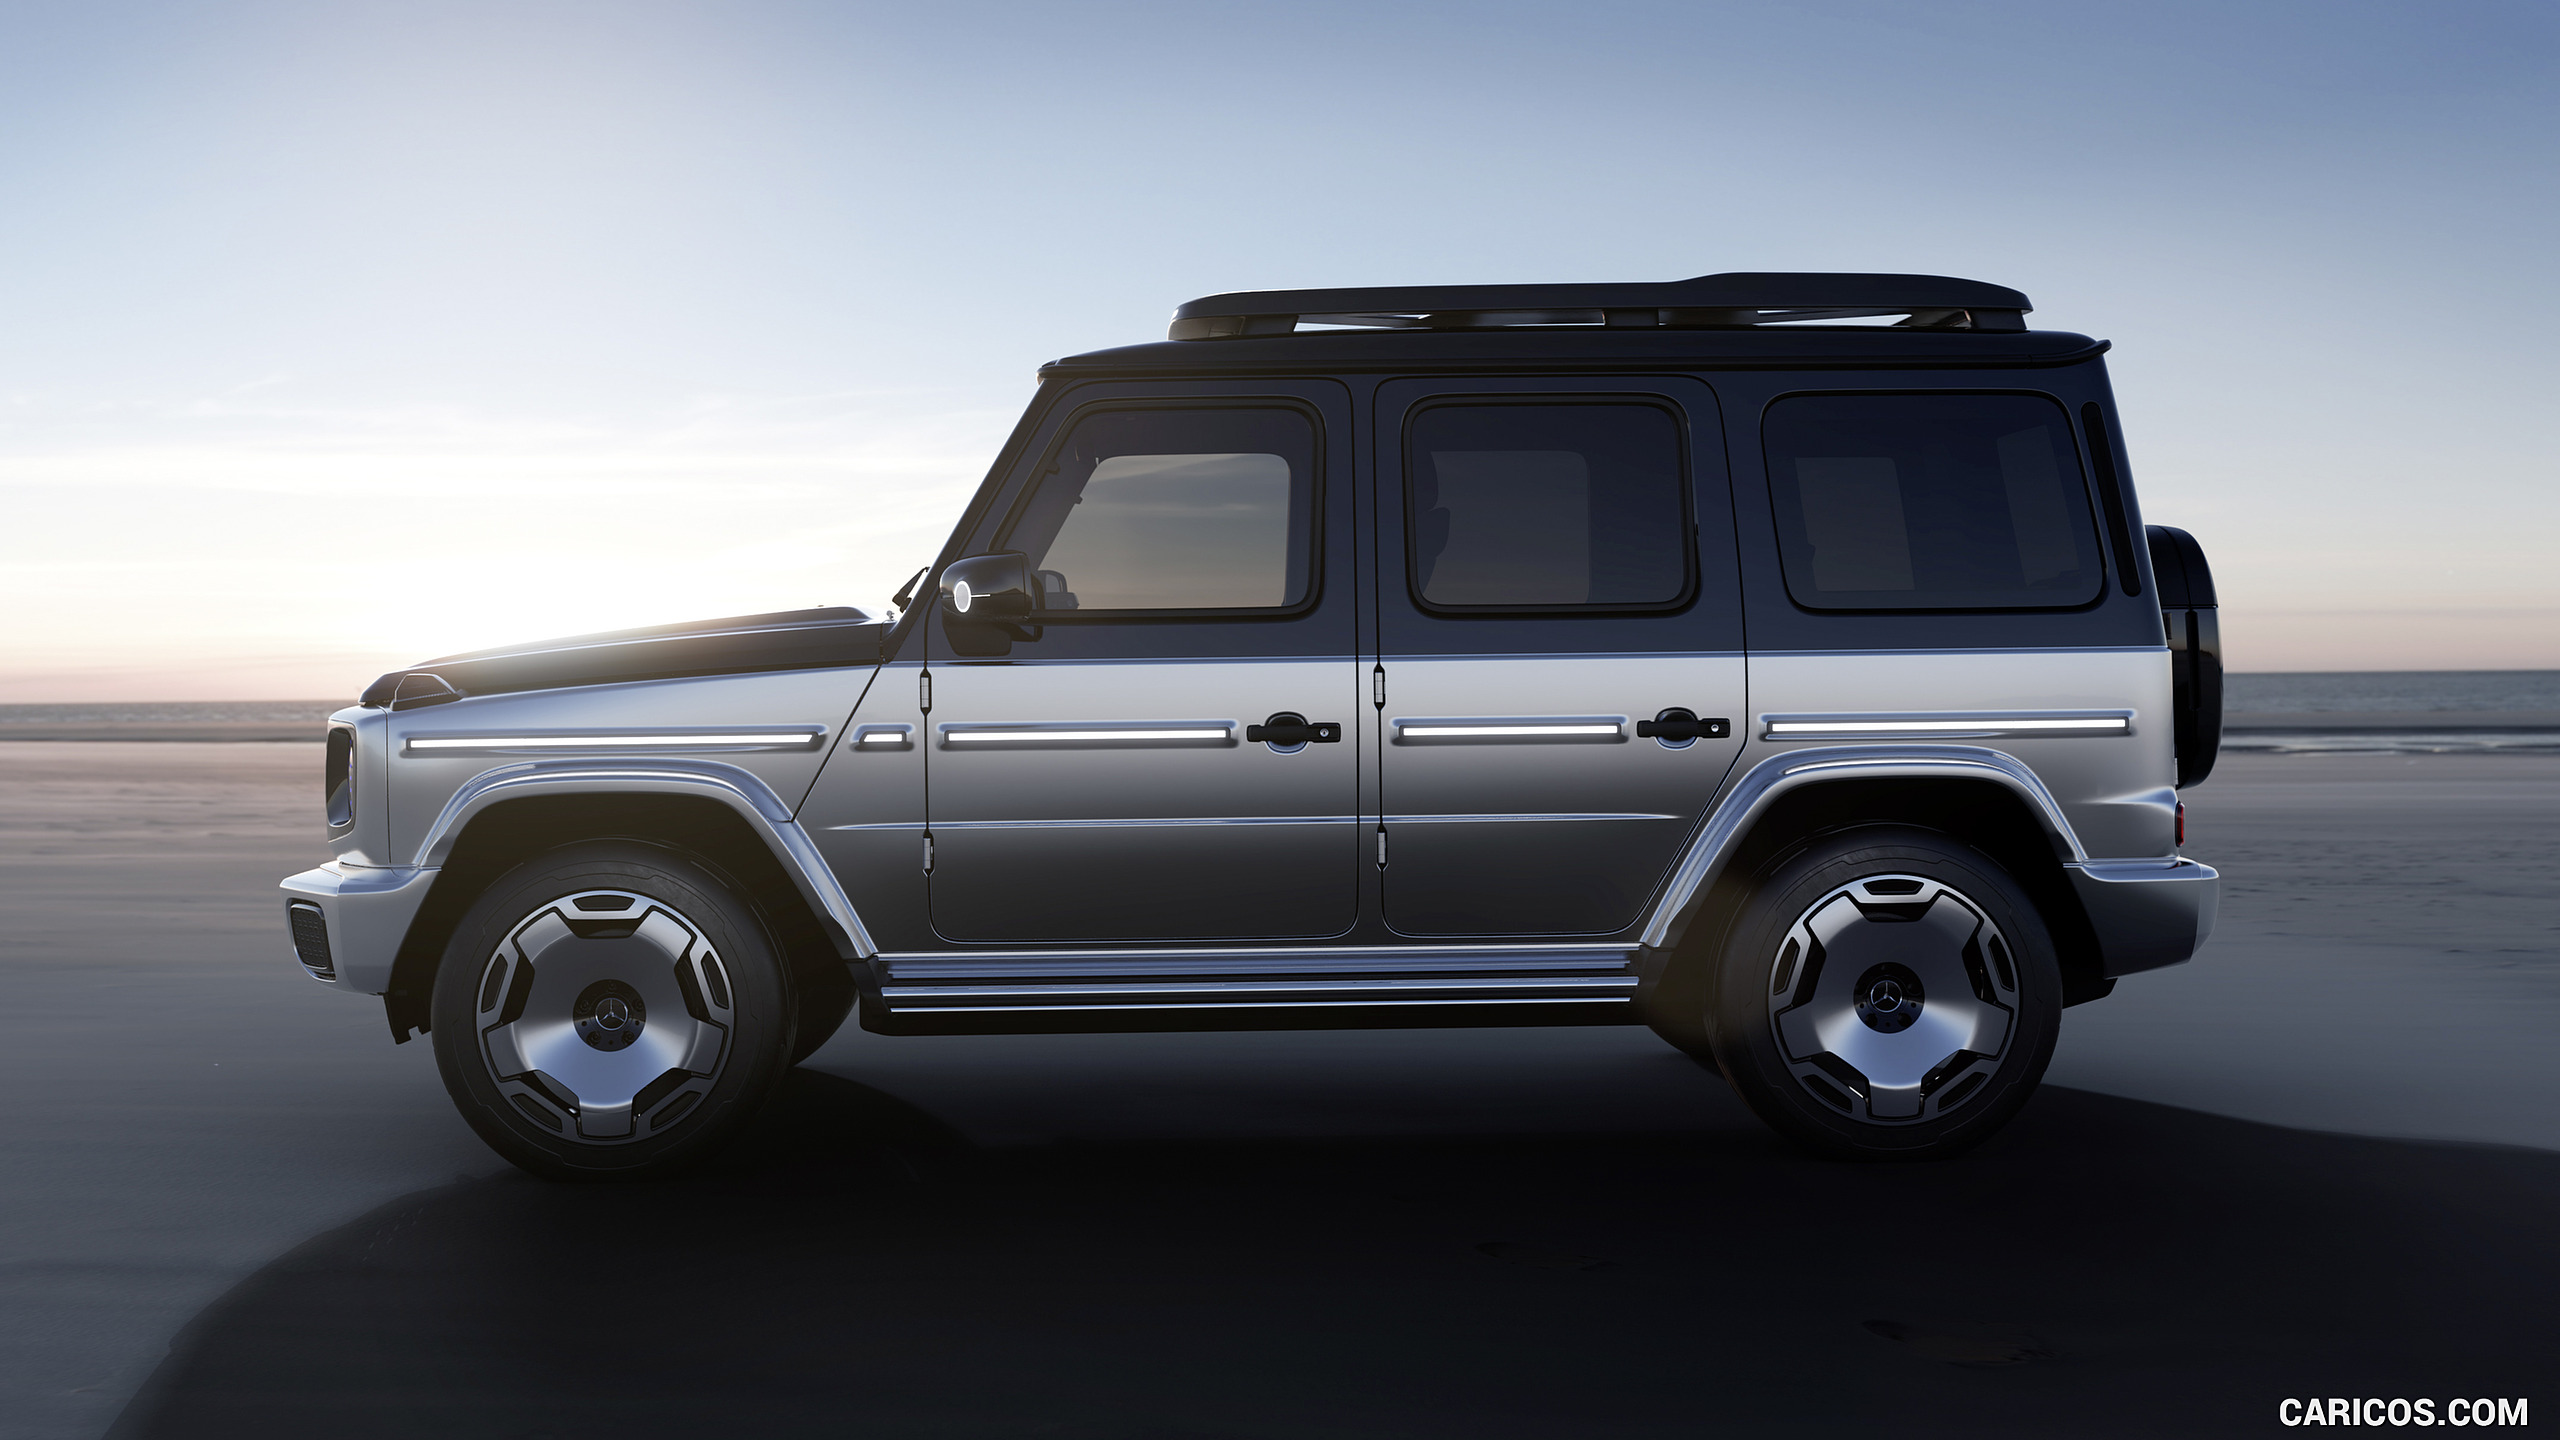 2021 Mercedes-Benz EQG Electric G-Class Concept - Side, #2 of 19